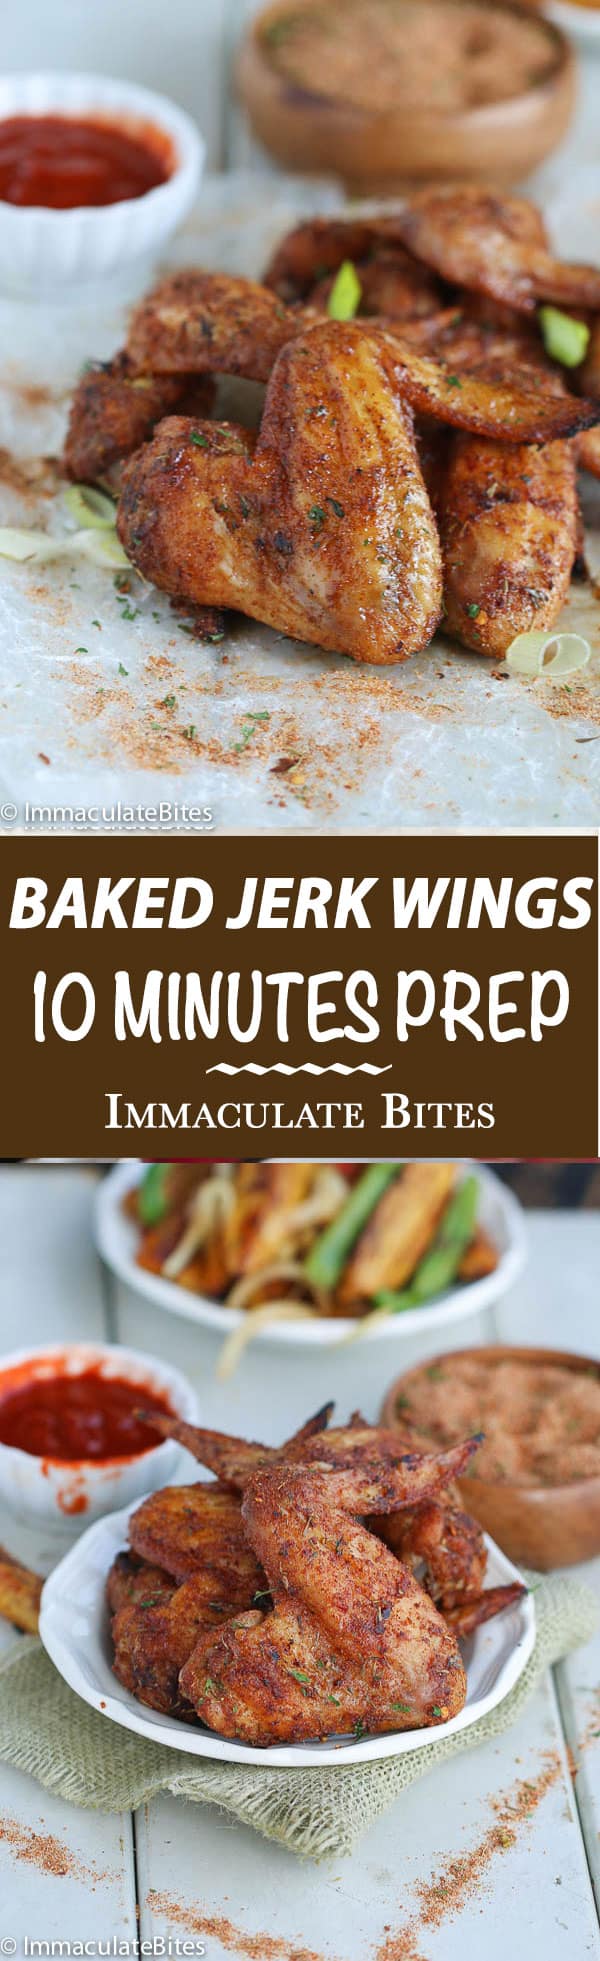 Crispy Baked Jerk Chicken Wings with an amazing blend of herbs, heat and spices. 10 mins prep. Great for kids. Paleo